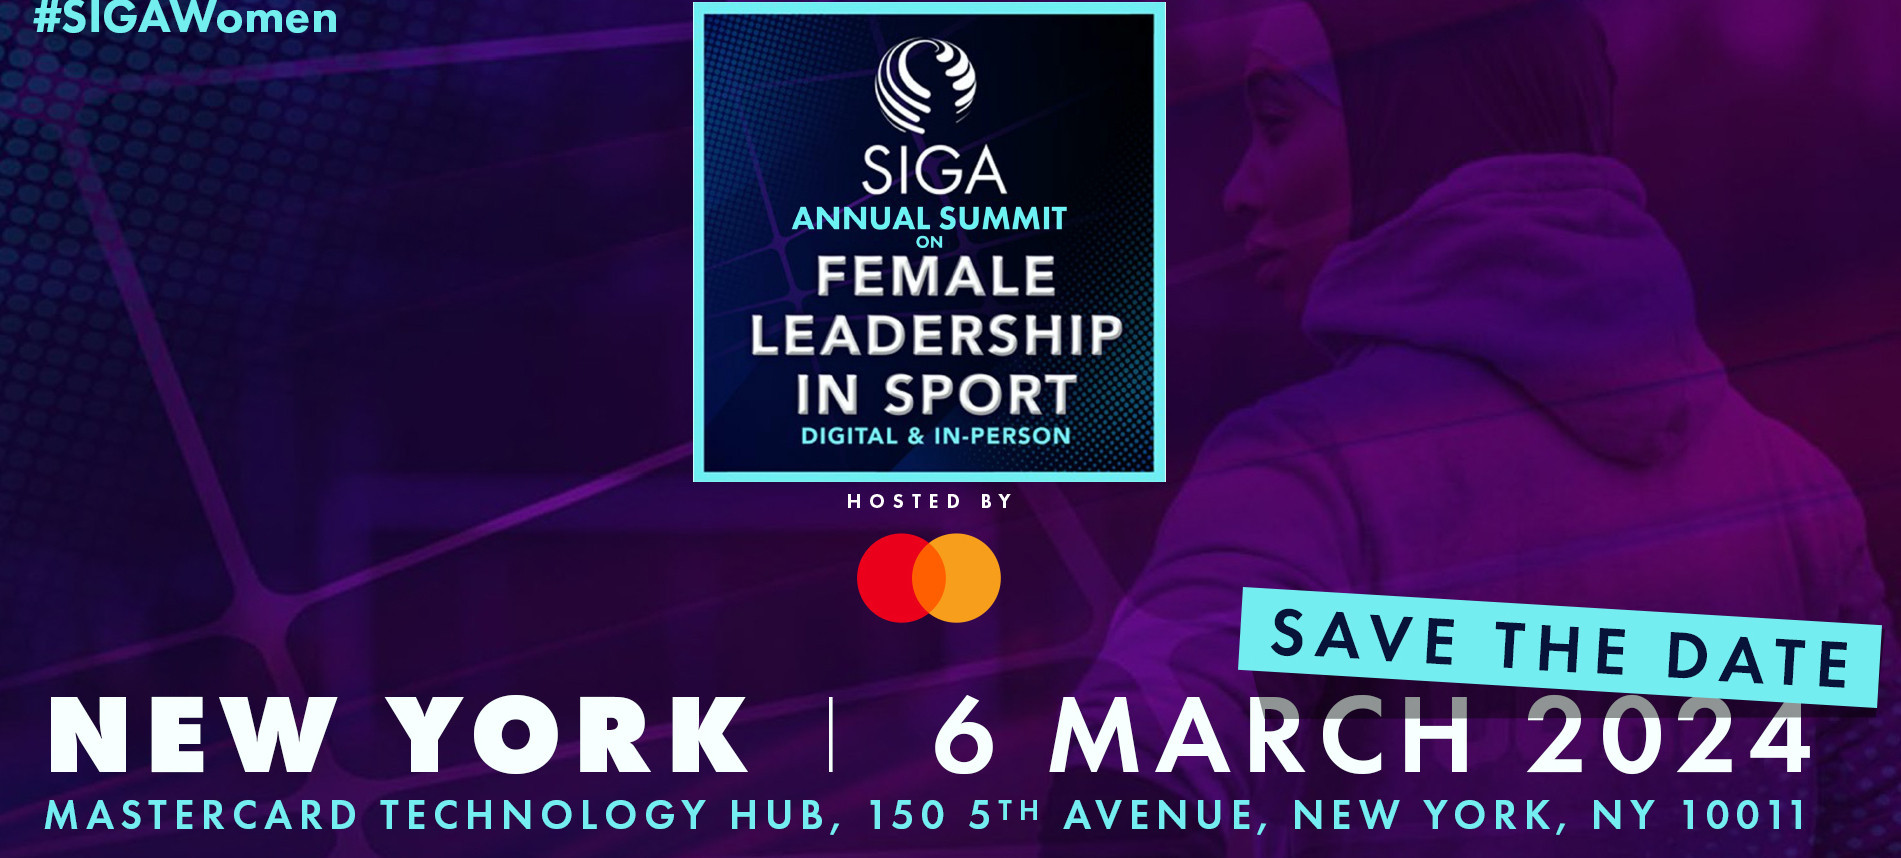 The annual SIGA Summit on Women's Leadership in Sport is back!